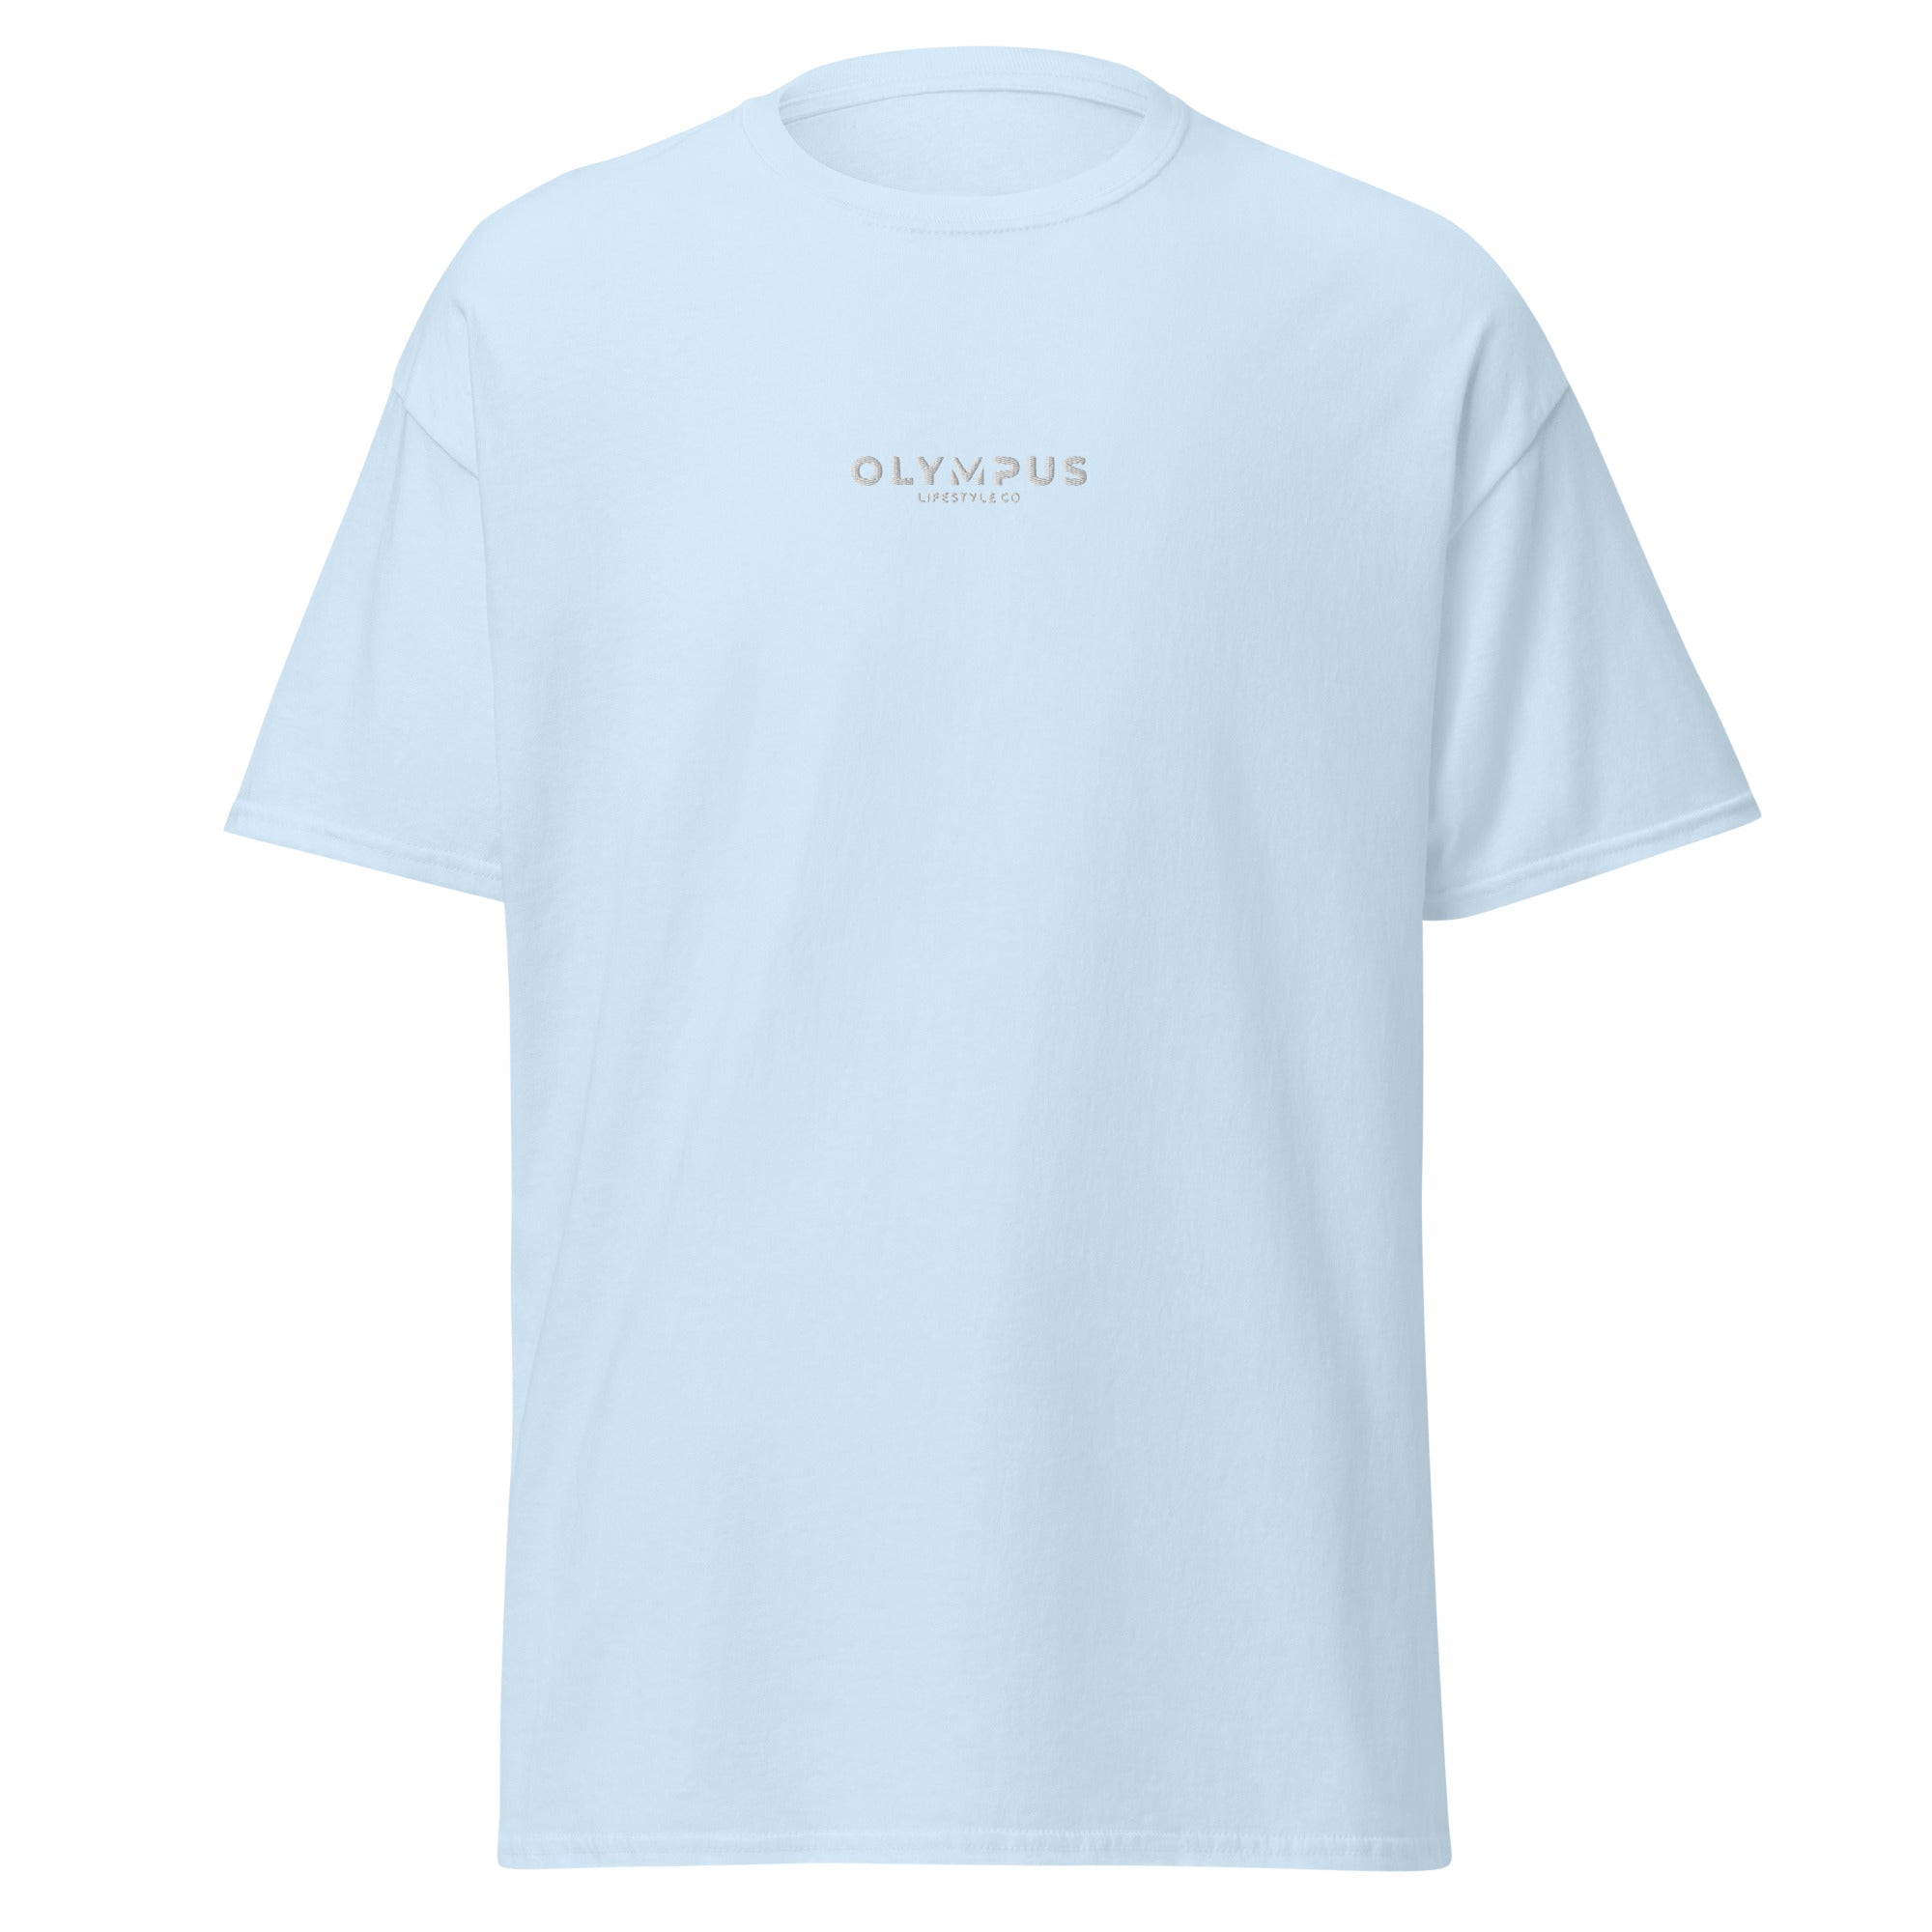 Olympus Men's Embroidered T-Shirt White Text Logo